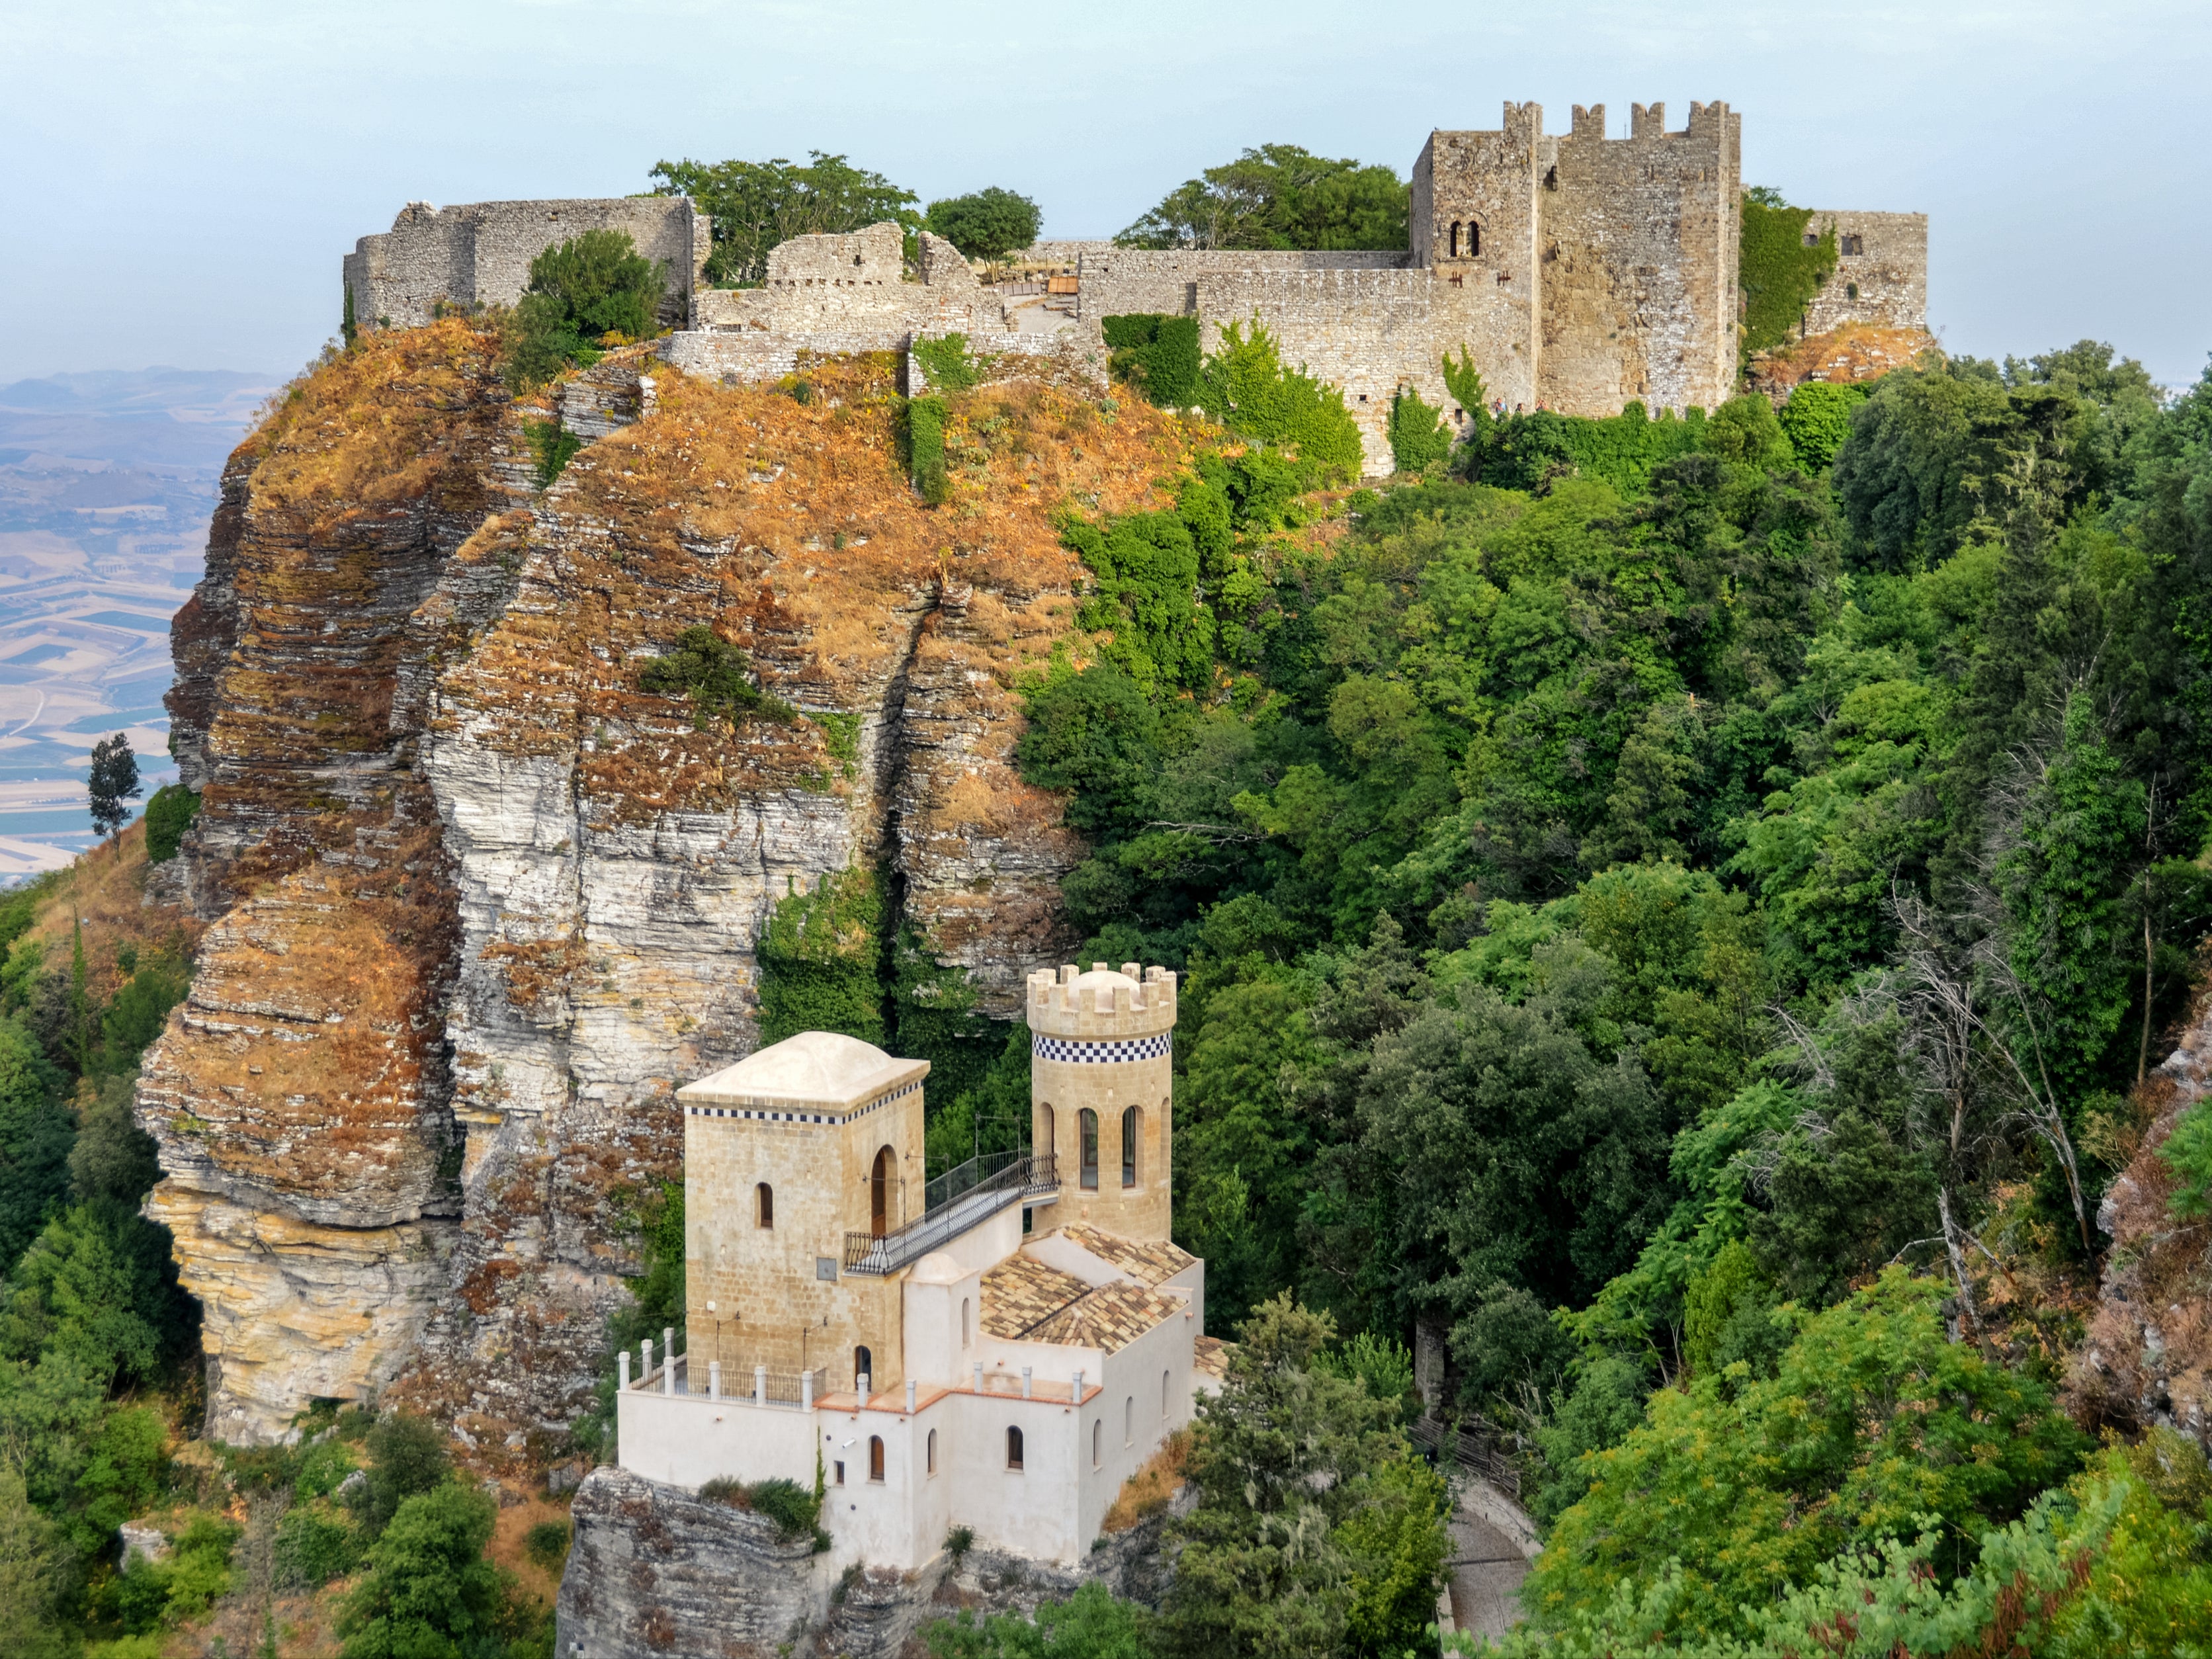 Set 750 metres above sea level, Erice offers breathtaking views